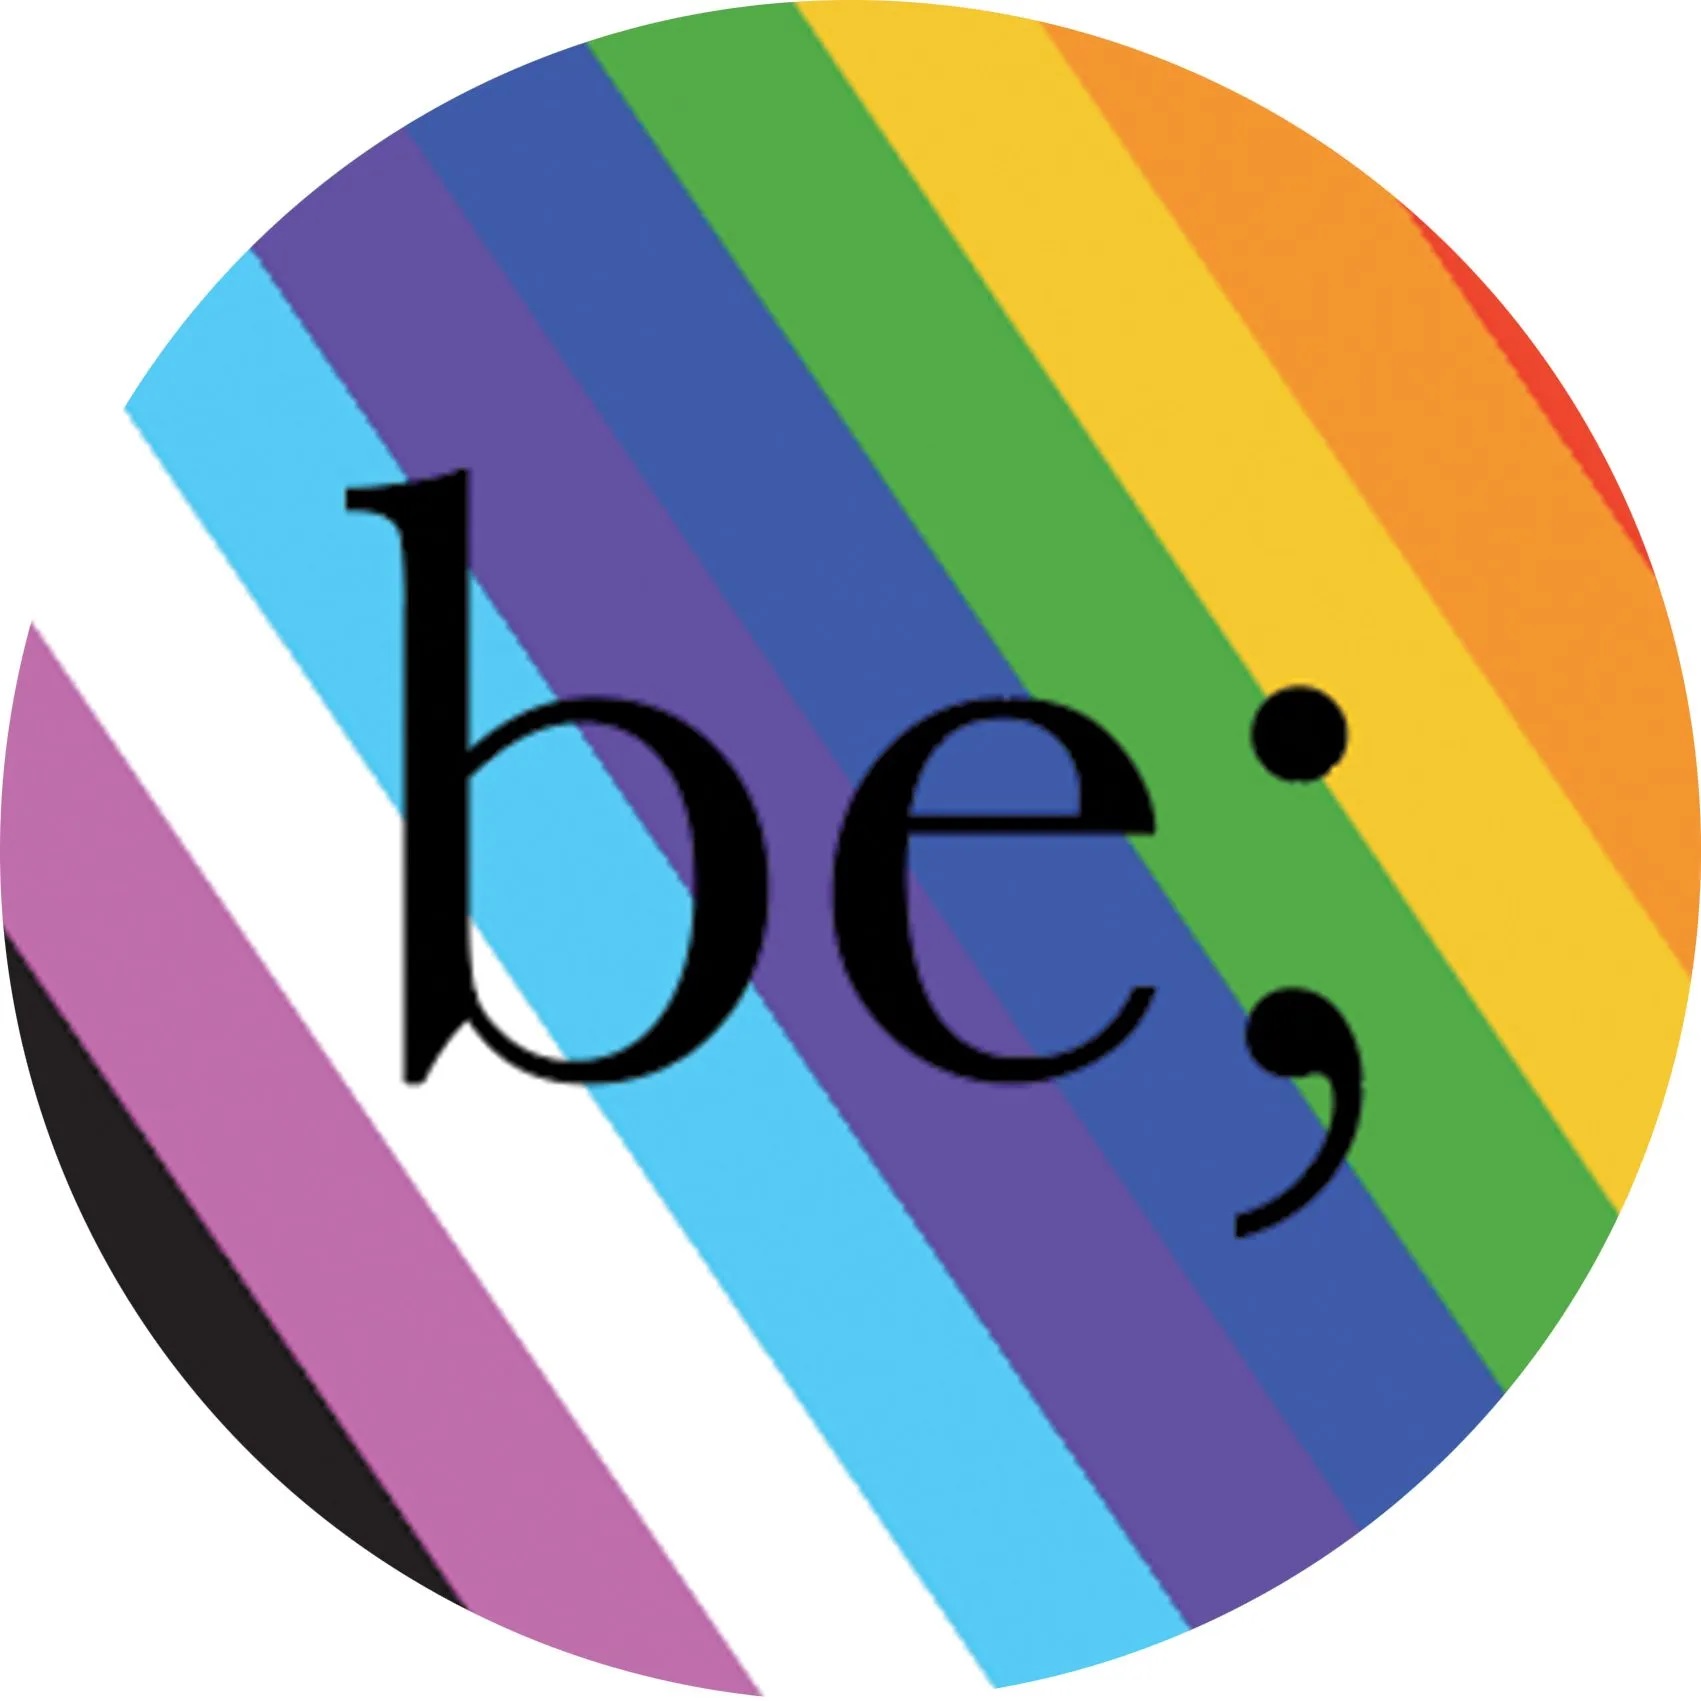 New Local Organization: “be;” [where your feet are]